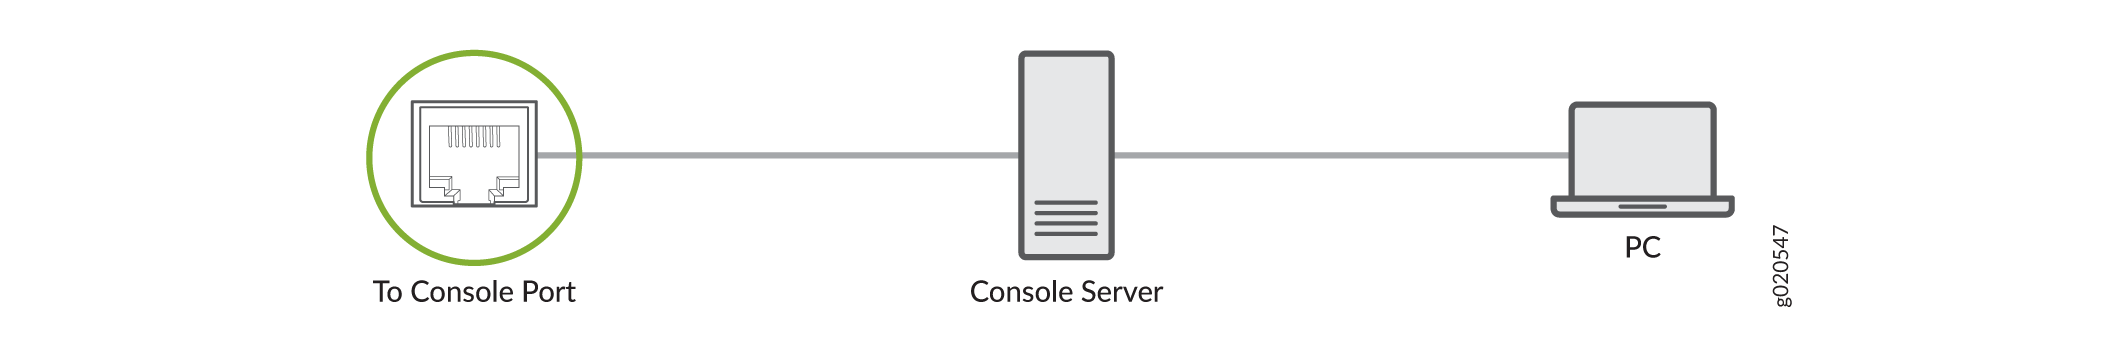 Connecting the ACX7509 Router to a Management Console Through a Console Server